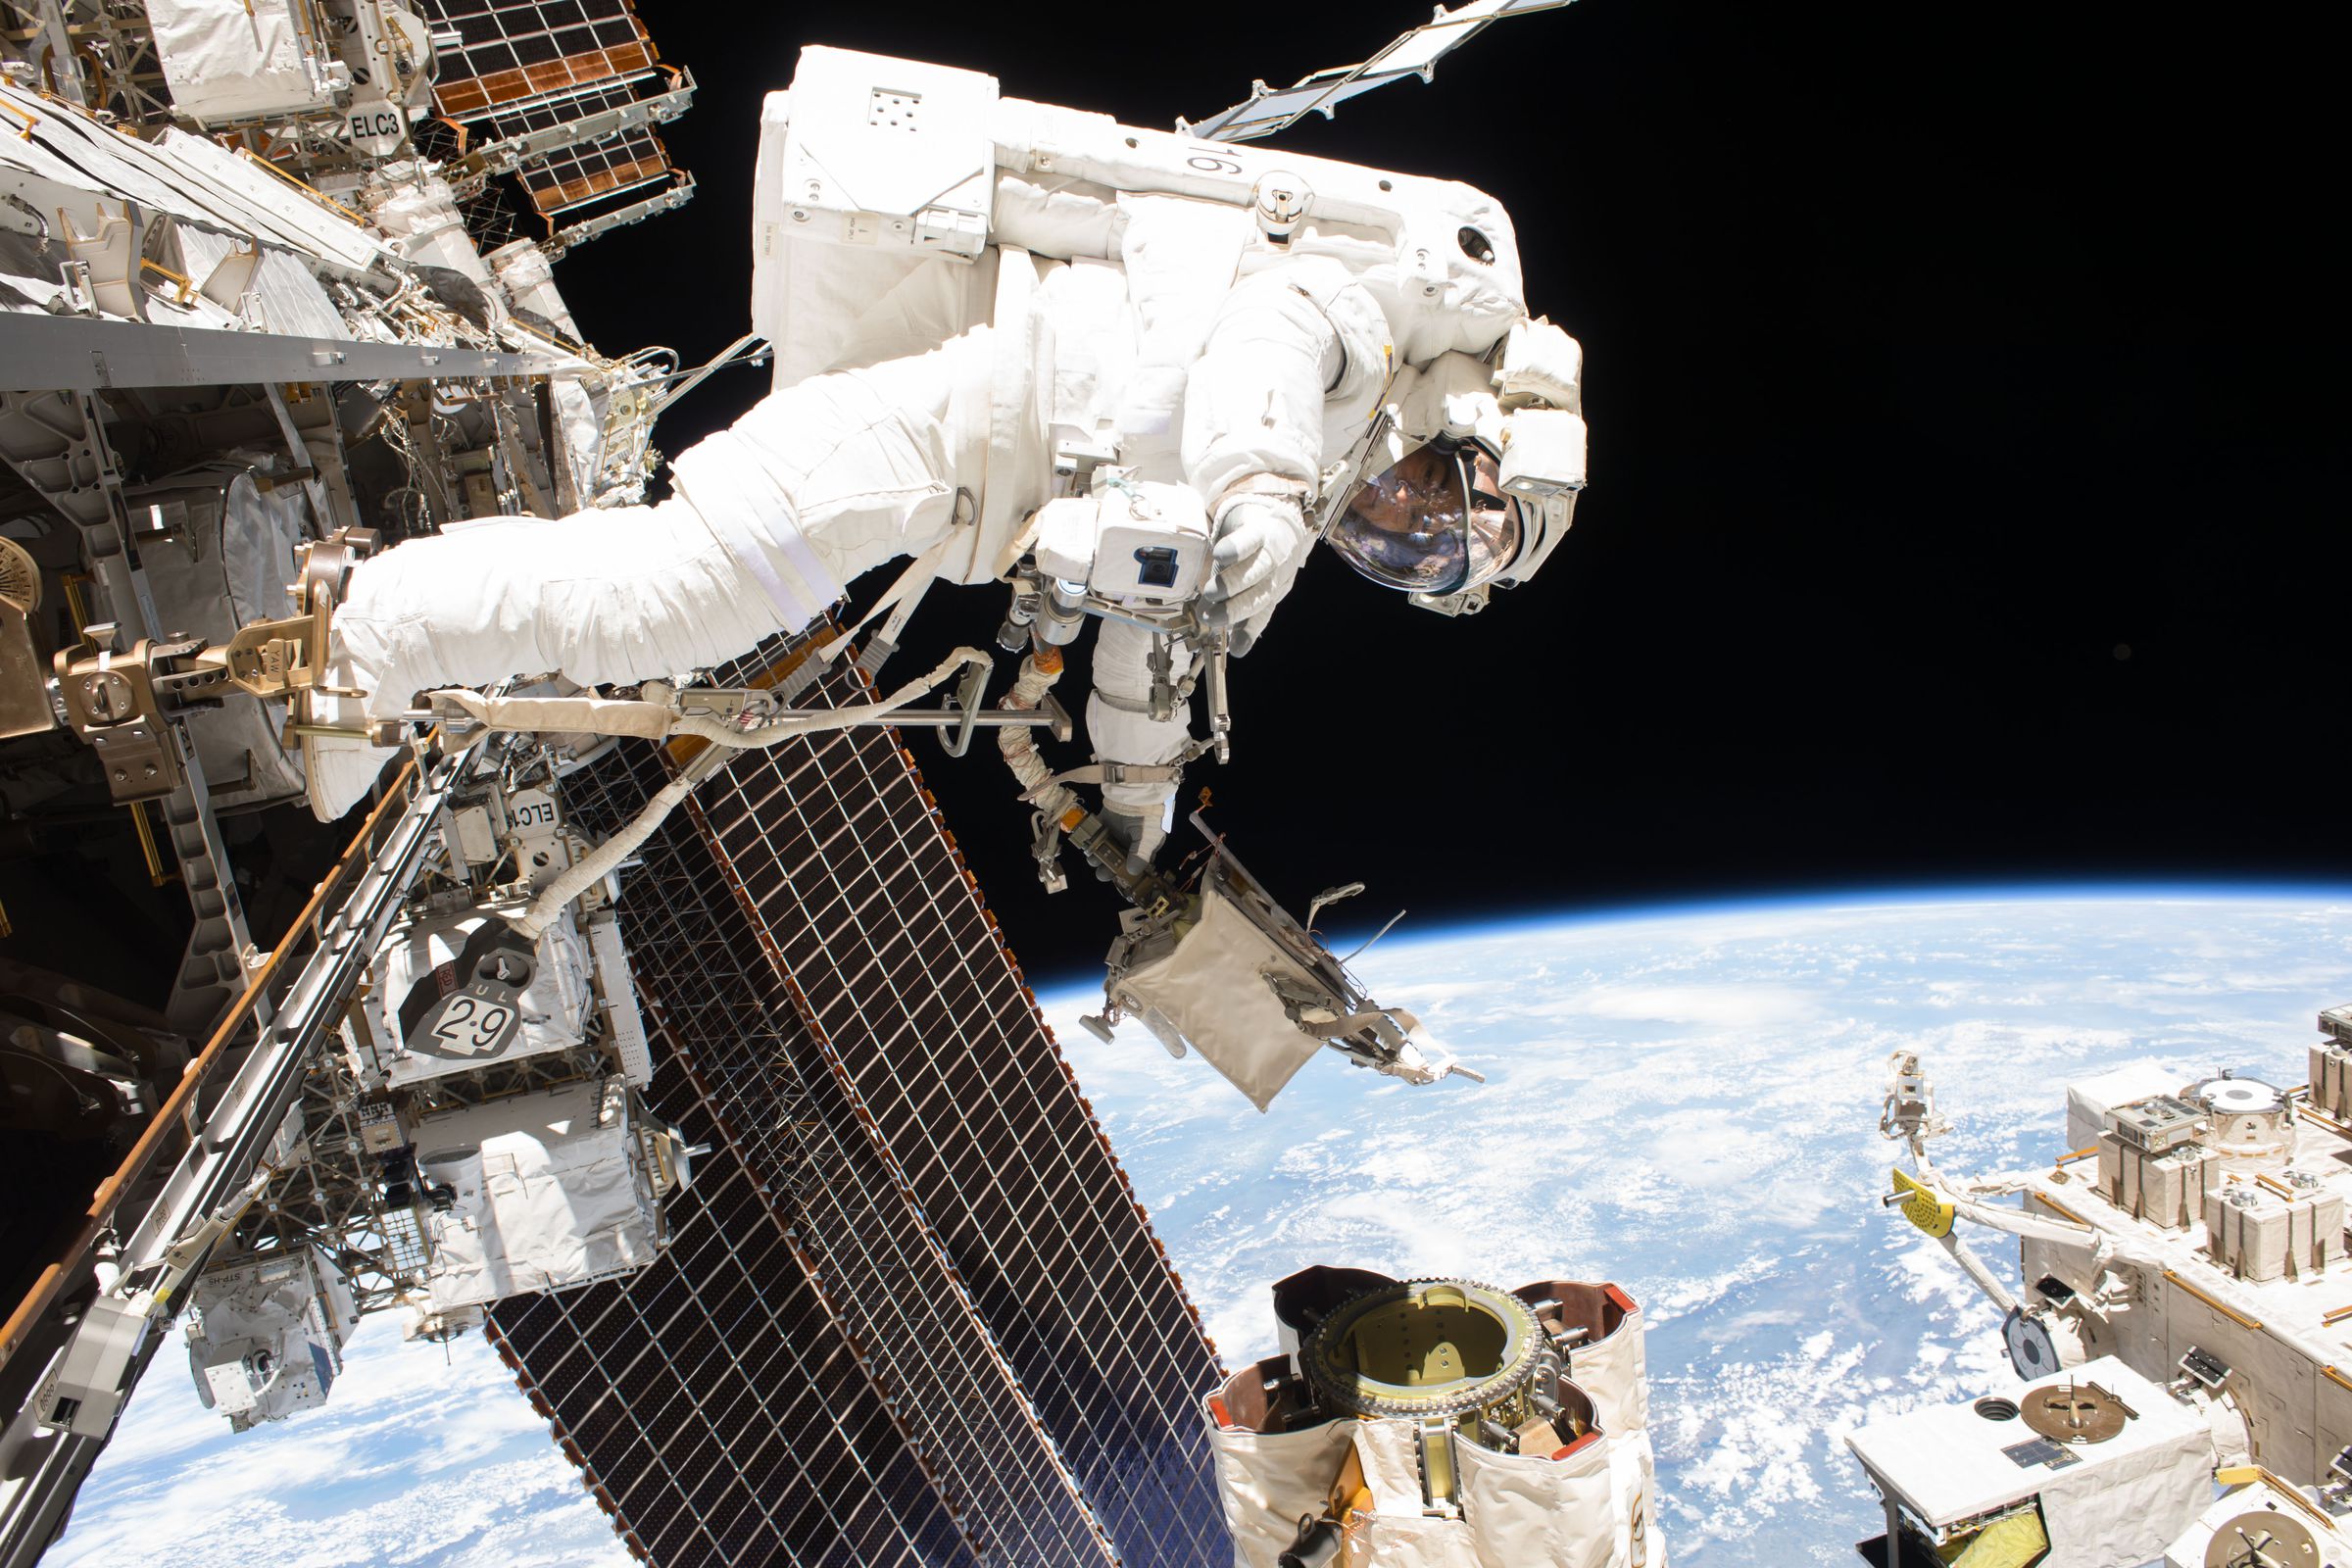 Lithium-ion batteries are used to power NASA’s spacesuits on the International Space Station